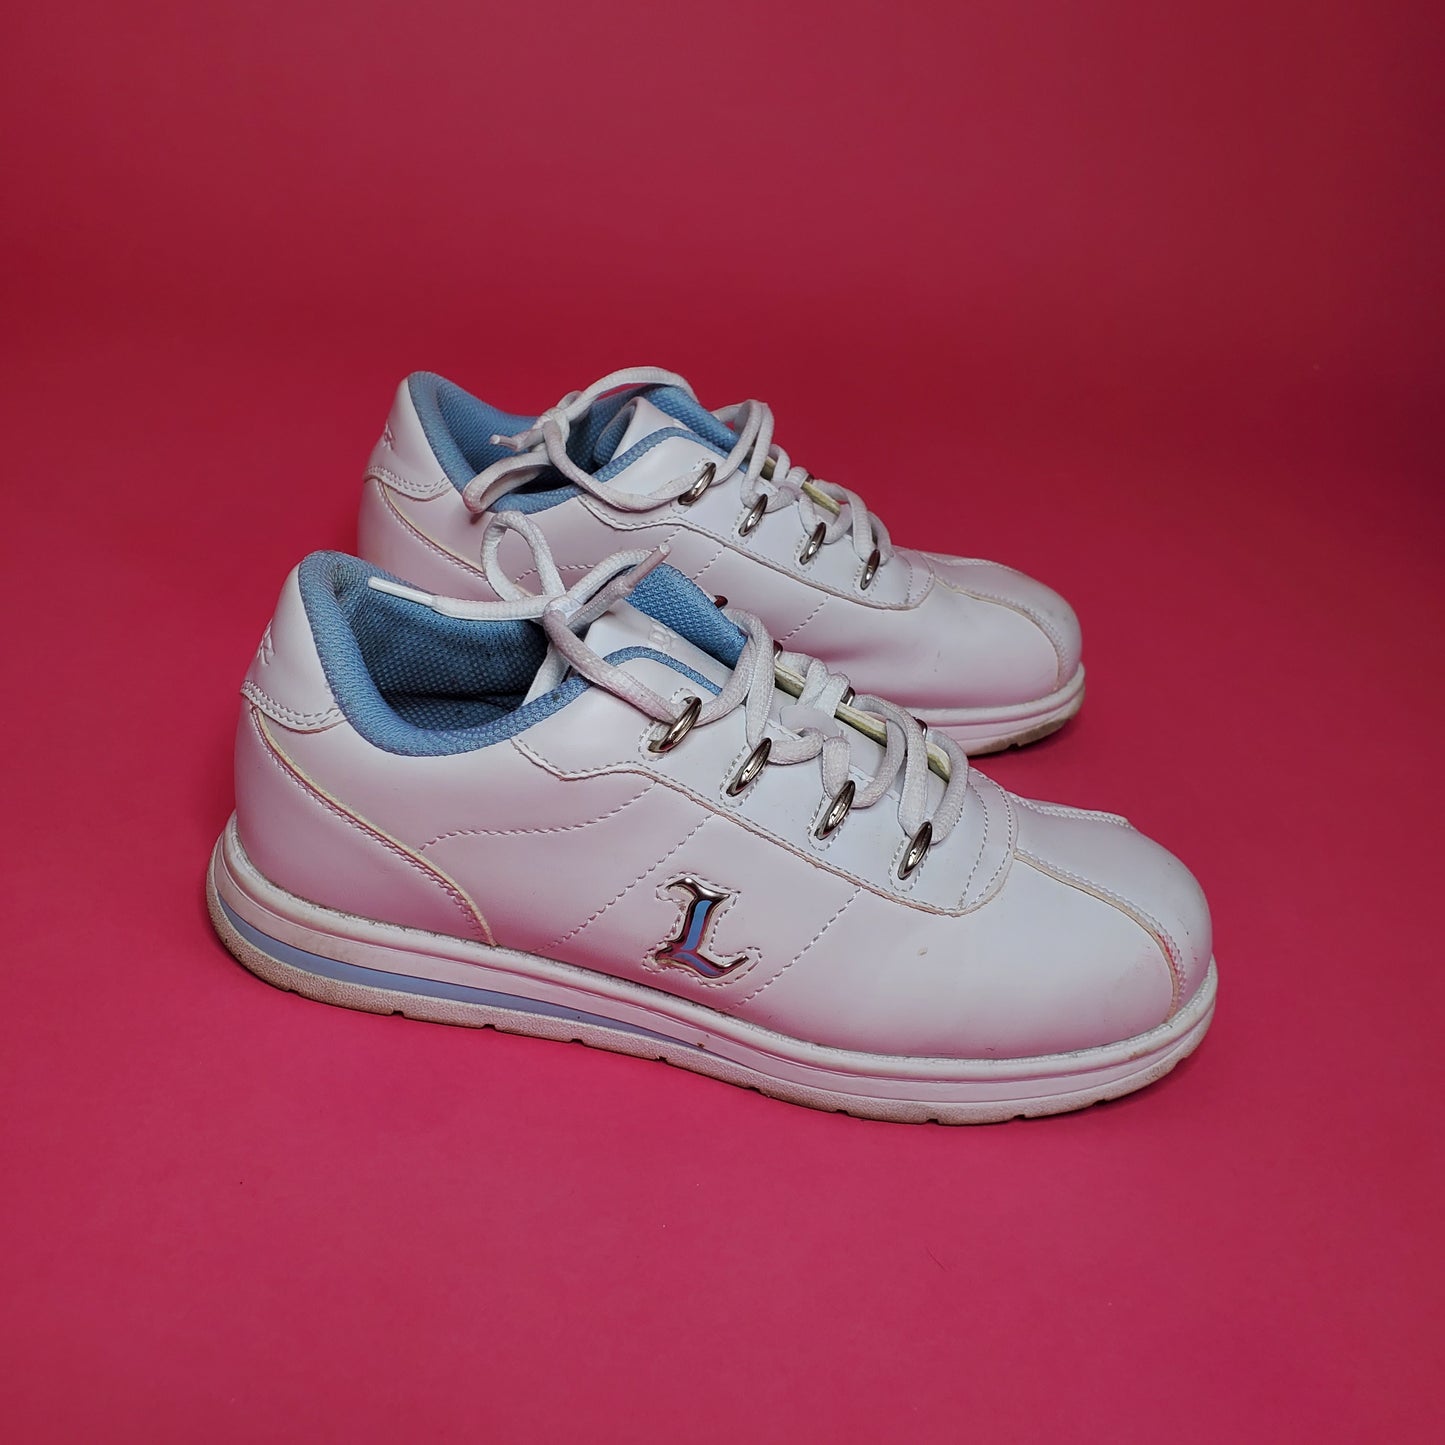 white/baby blue Lugz lowtop sneakers